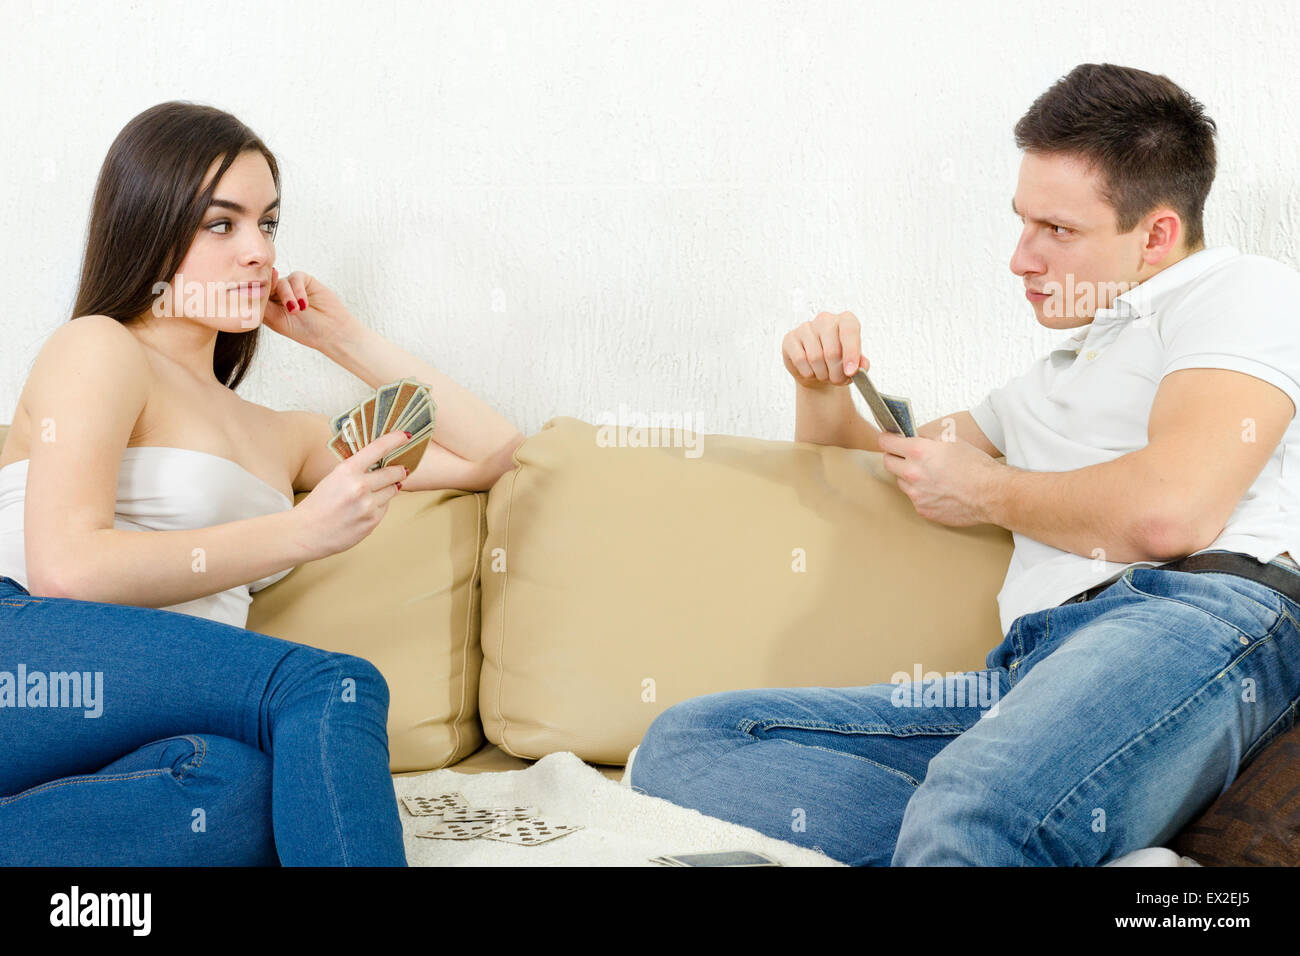 Sceptic young couple cheating each other in card game. Girl is bluffing and boyfriend is suspicious. Game is heating up. Suspici Stock Photo